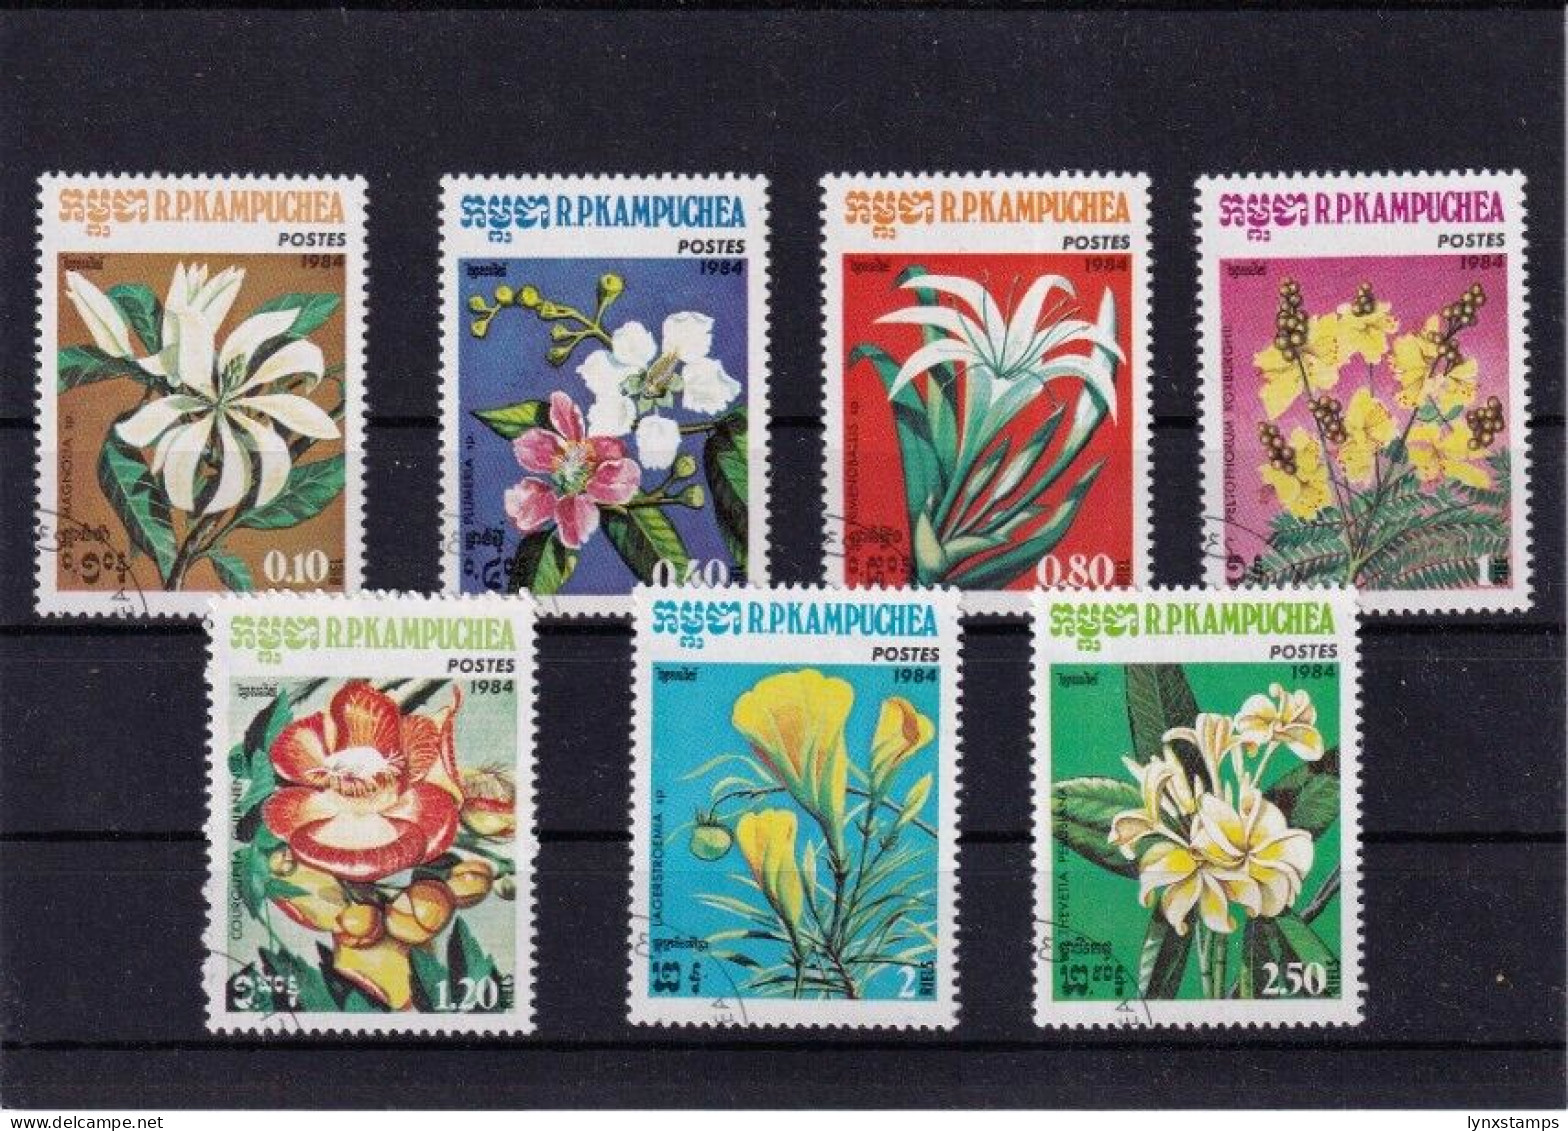 ER02 Kampuchea 1984 Flowers - Used Stamp Selection - Kampuchea